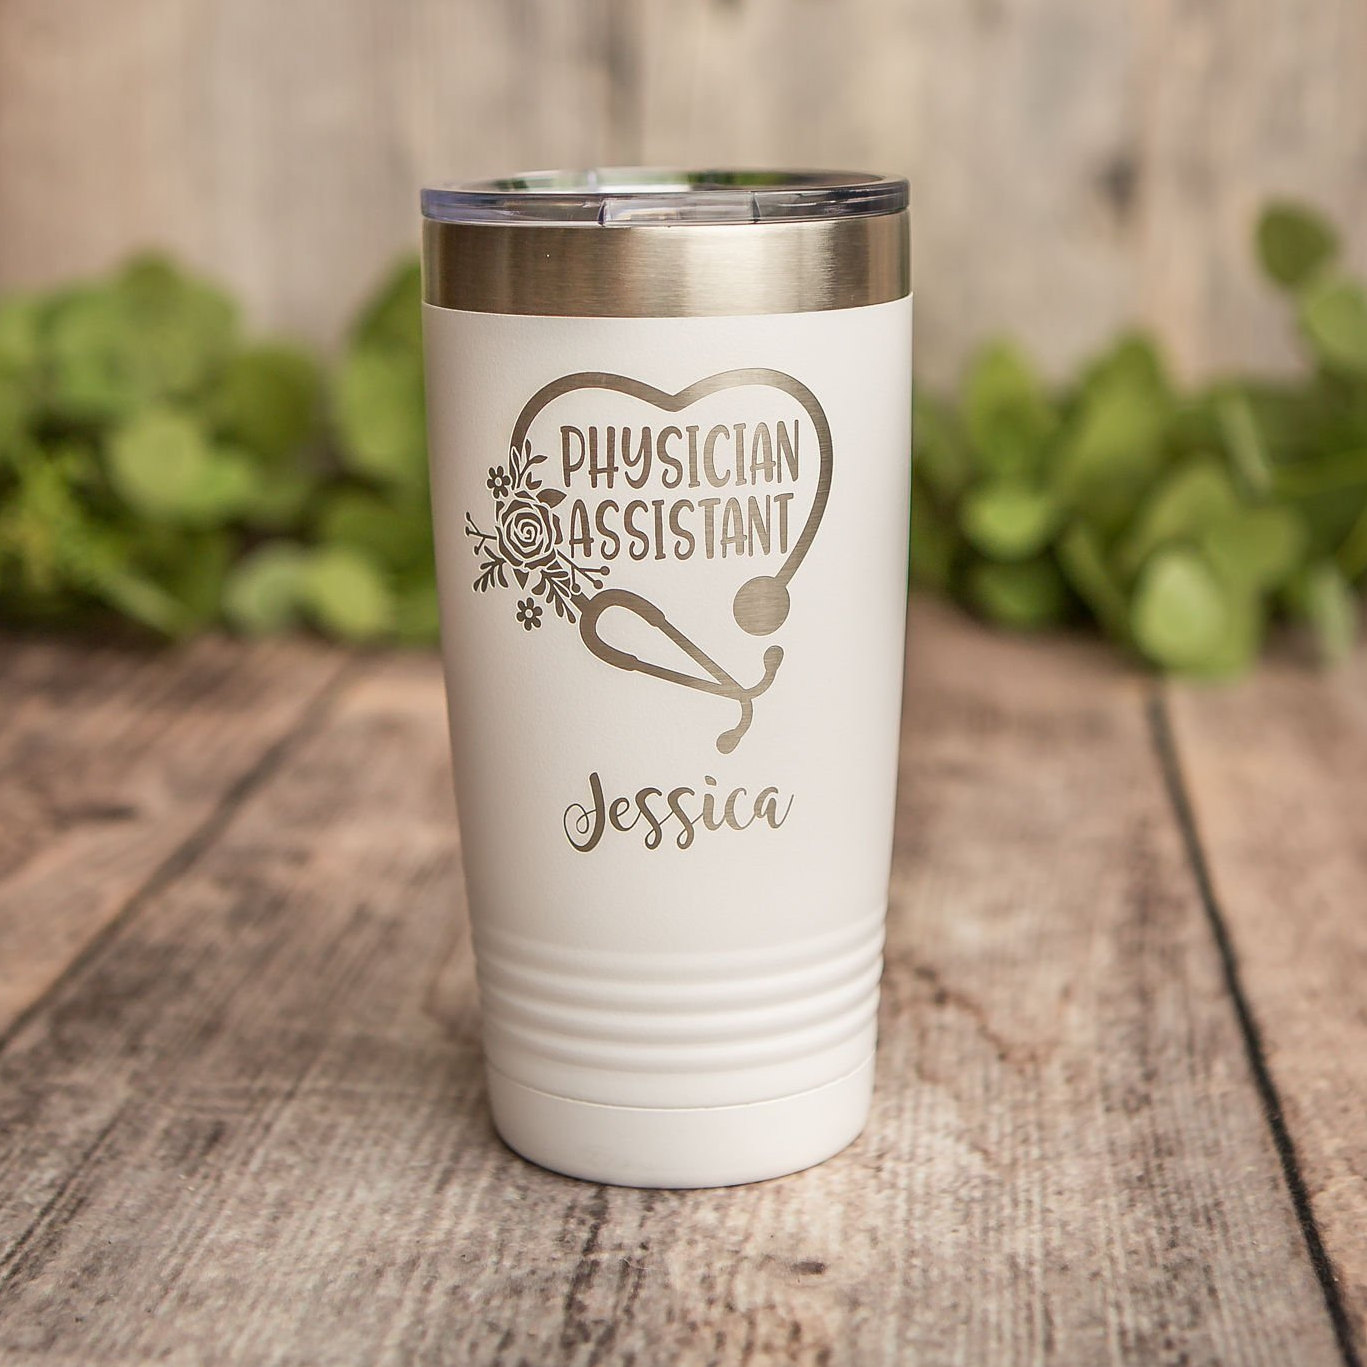 https://3cetching.com/wp-content/uploads/2020/09/physician-assistant-engraved-personalized-tumbler-with-name-yeti-style-cup-doctor-office-gift-5f5fb4a3.jpg